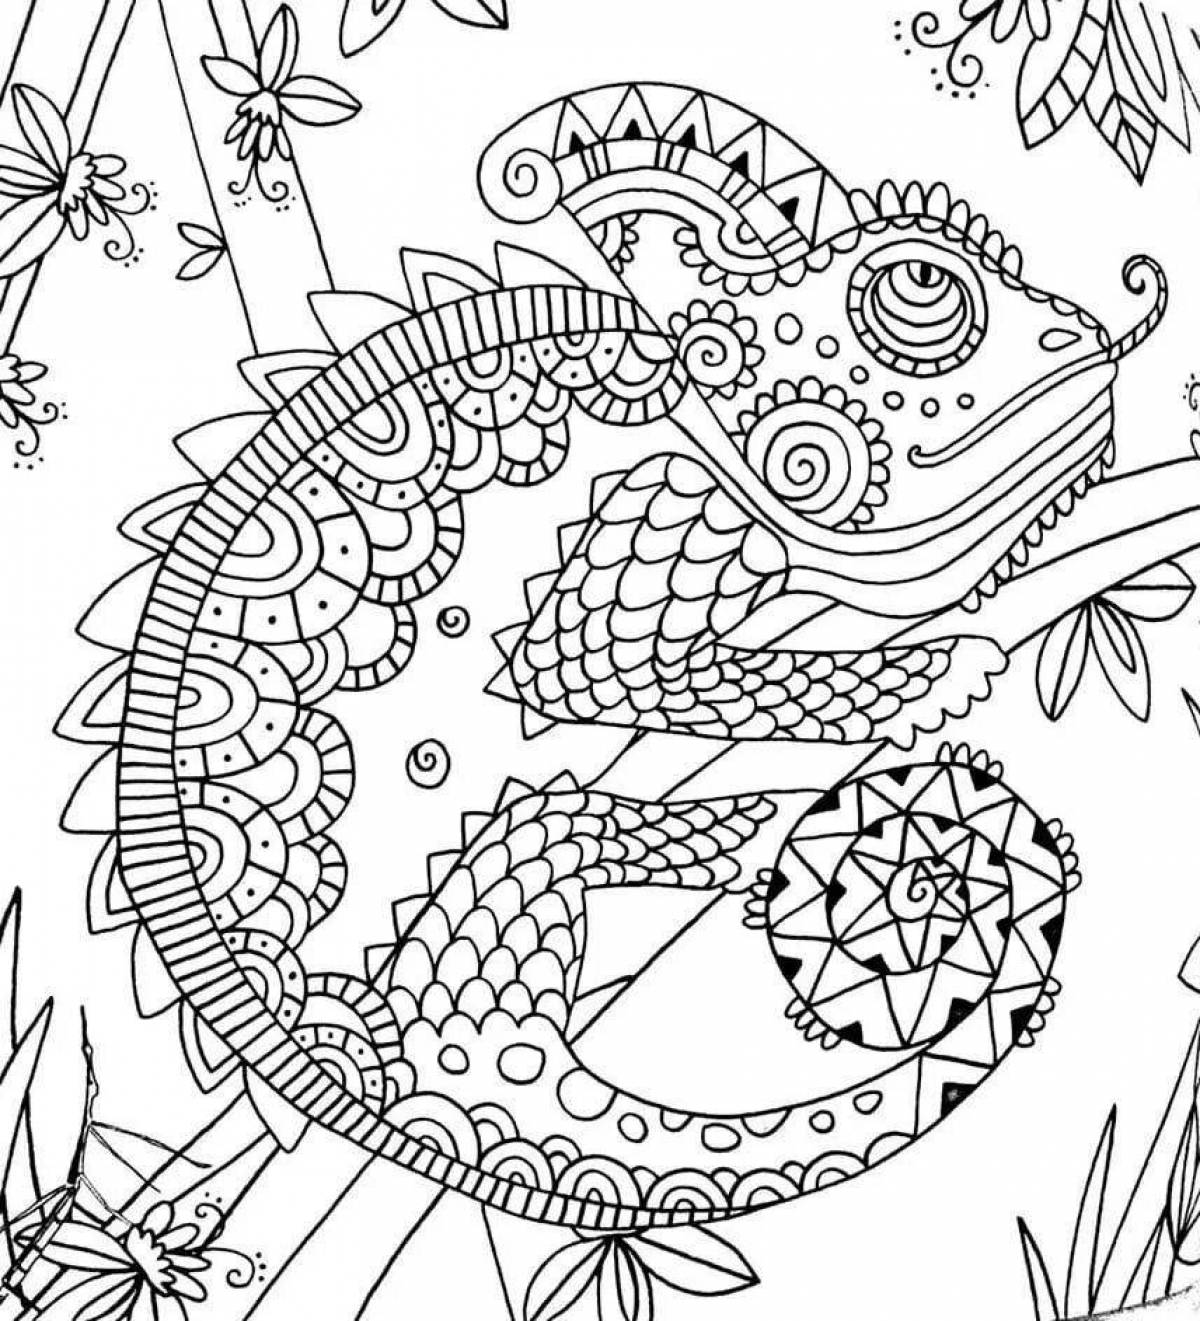 Exquisite antistress chameleon coloring book